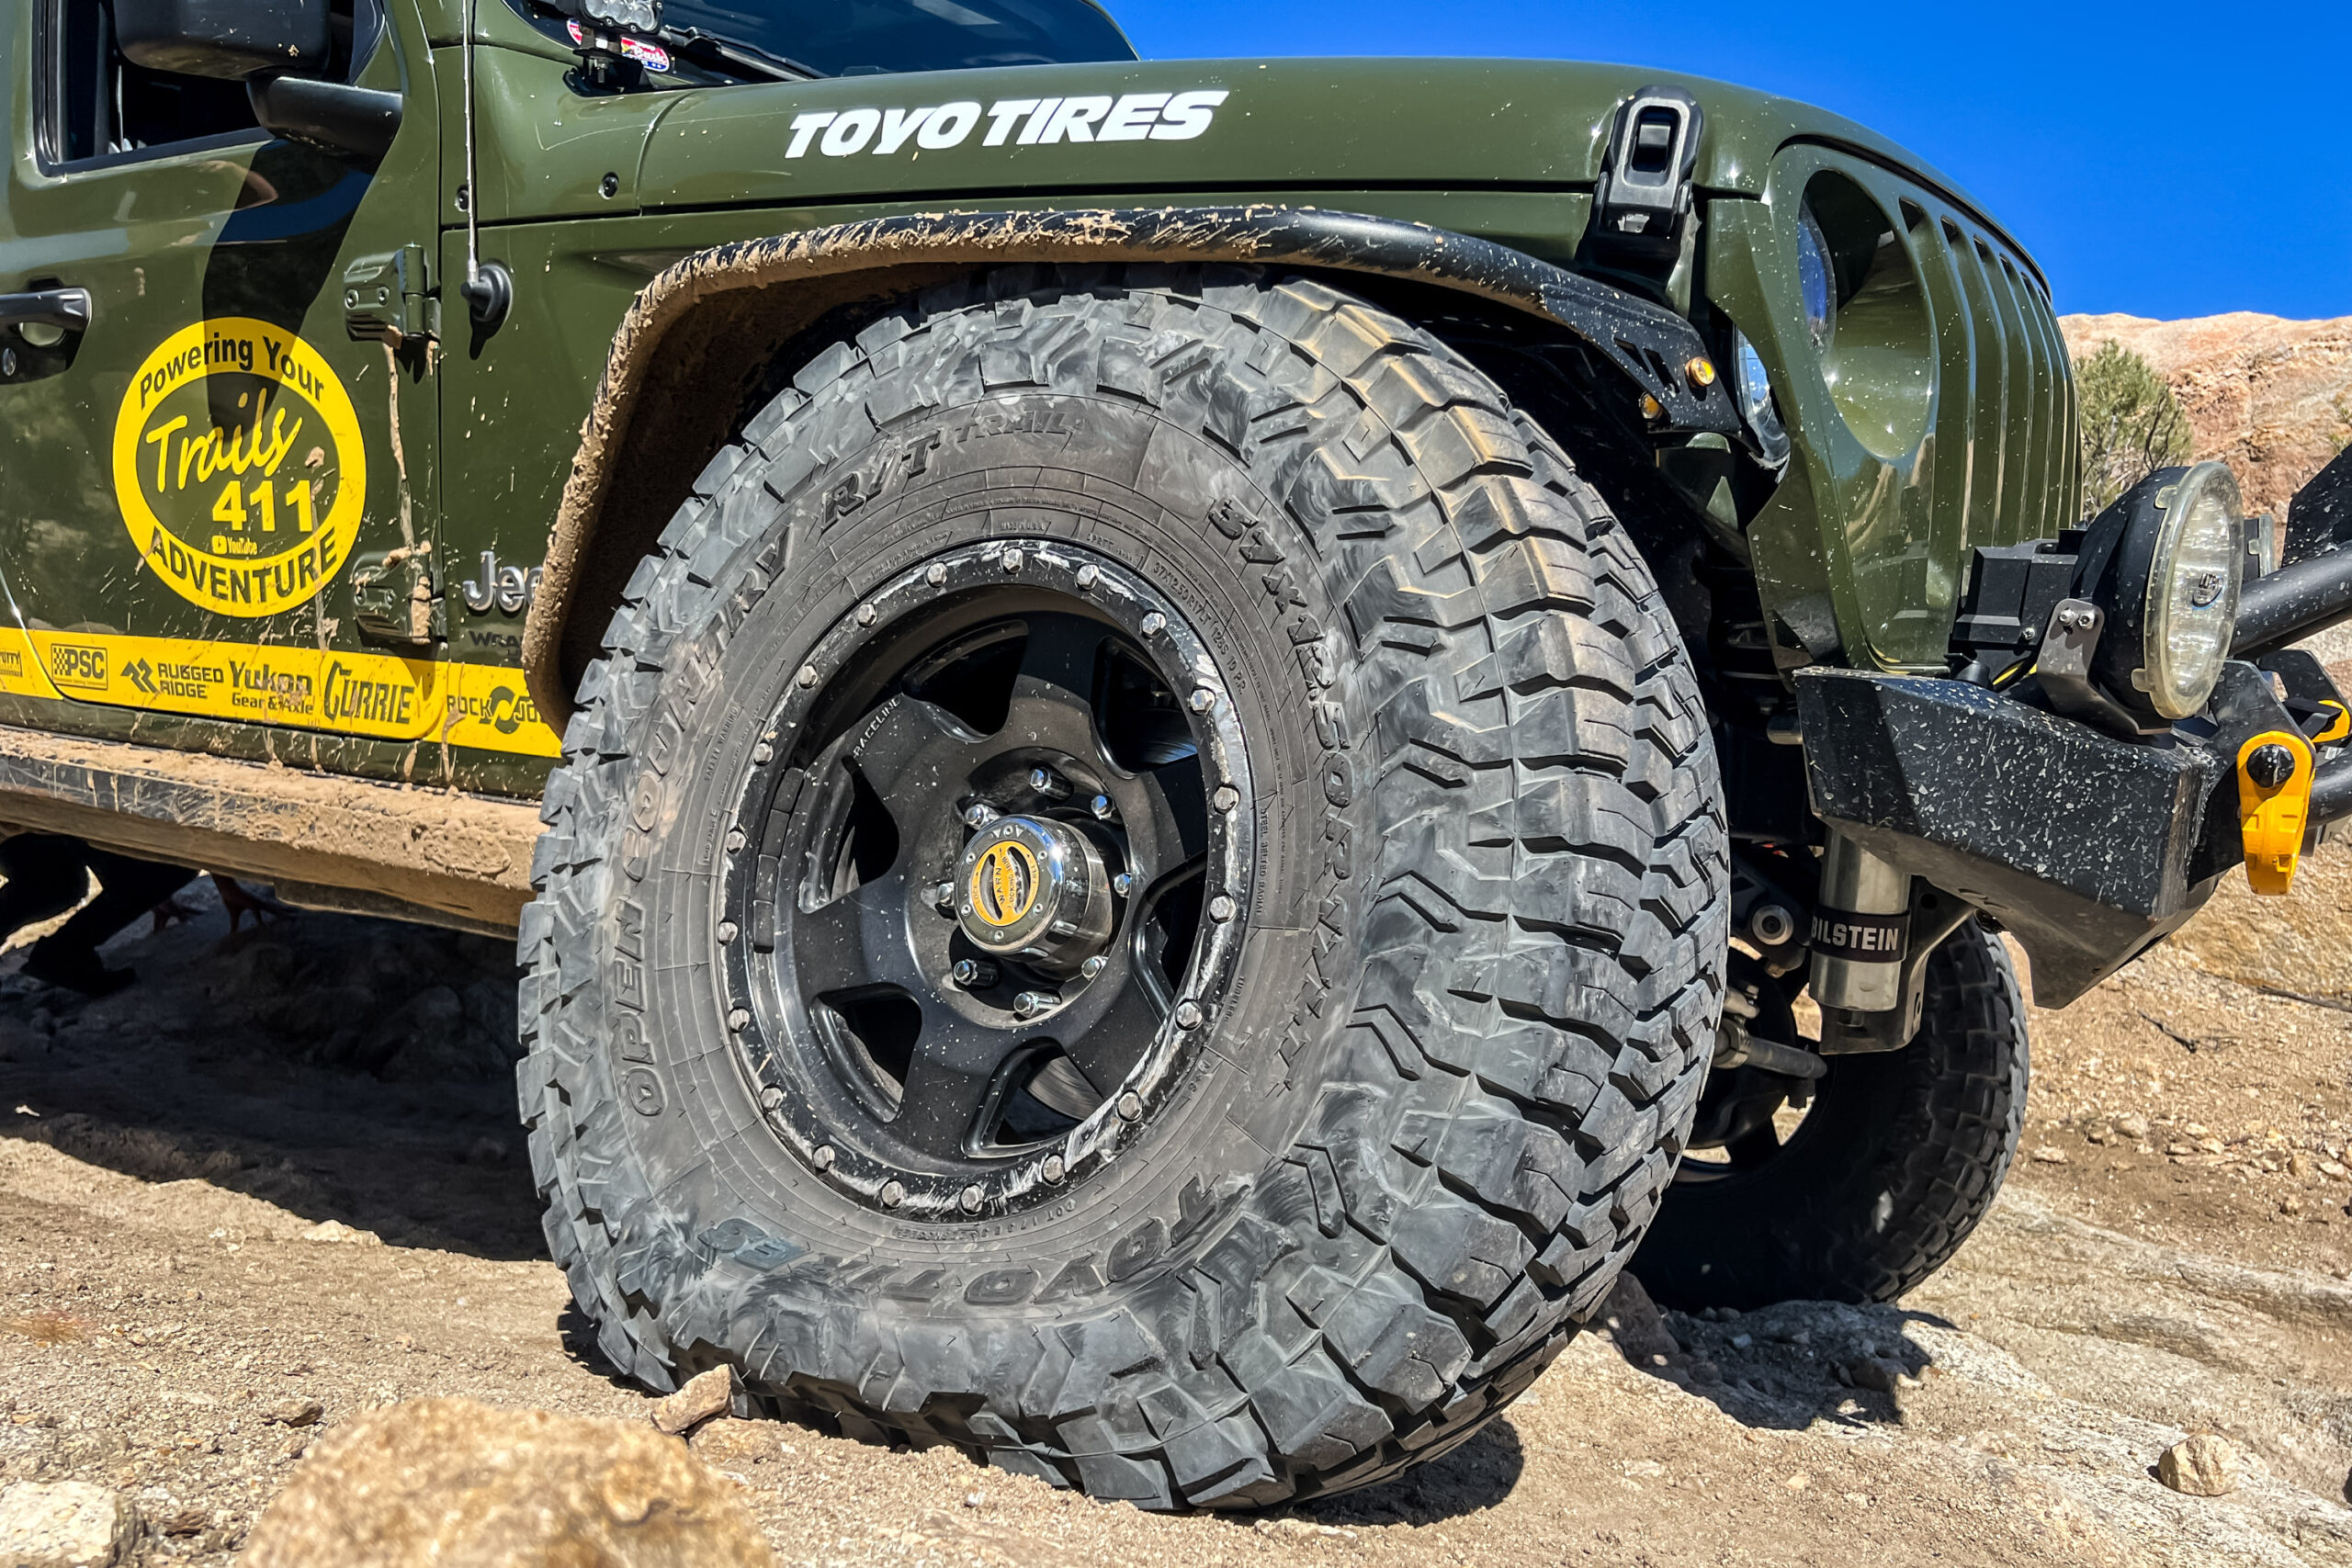 Which Tires Do You Need? Check Out Toyo's Open Country C/T